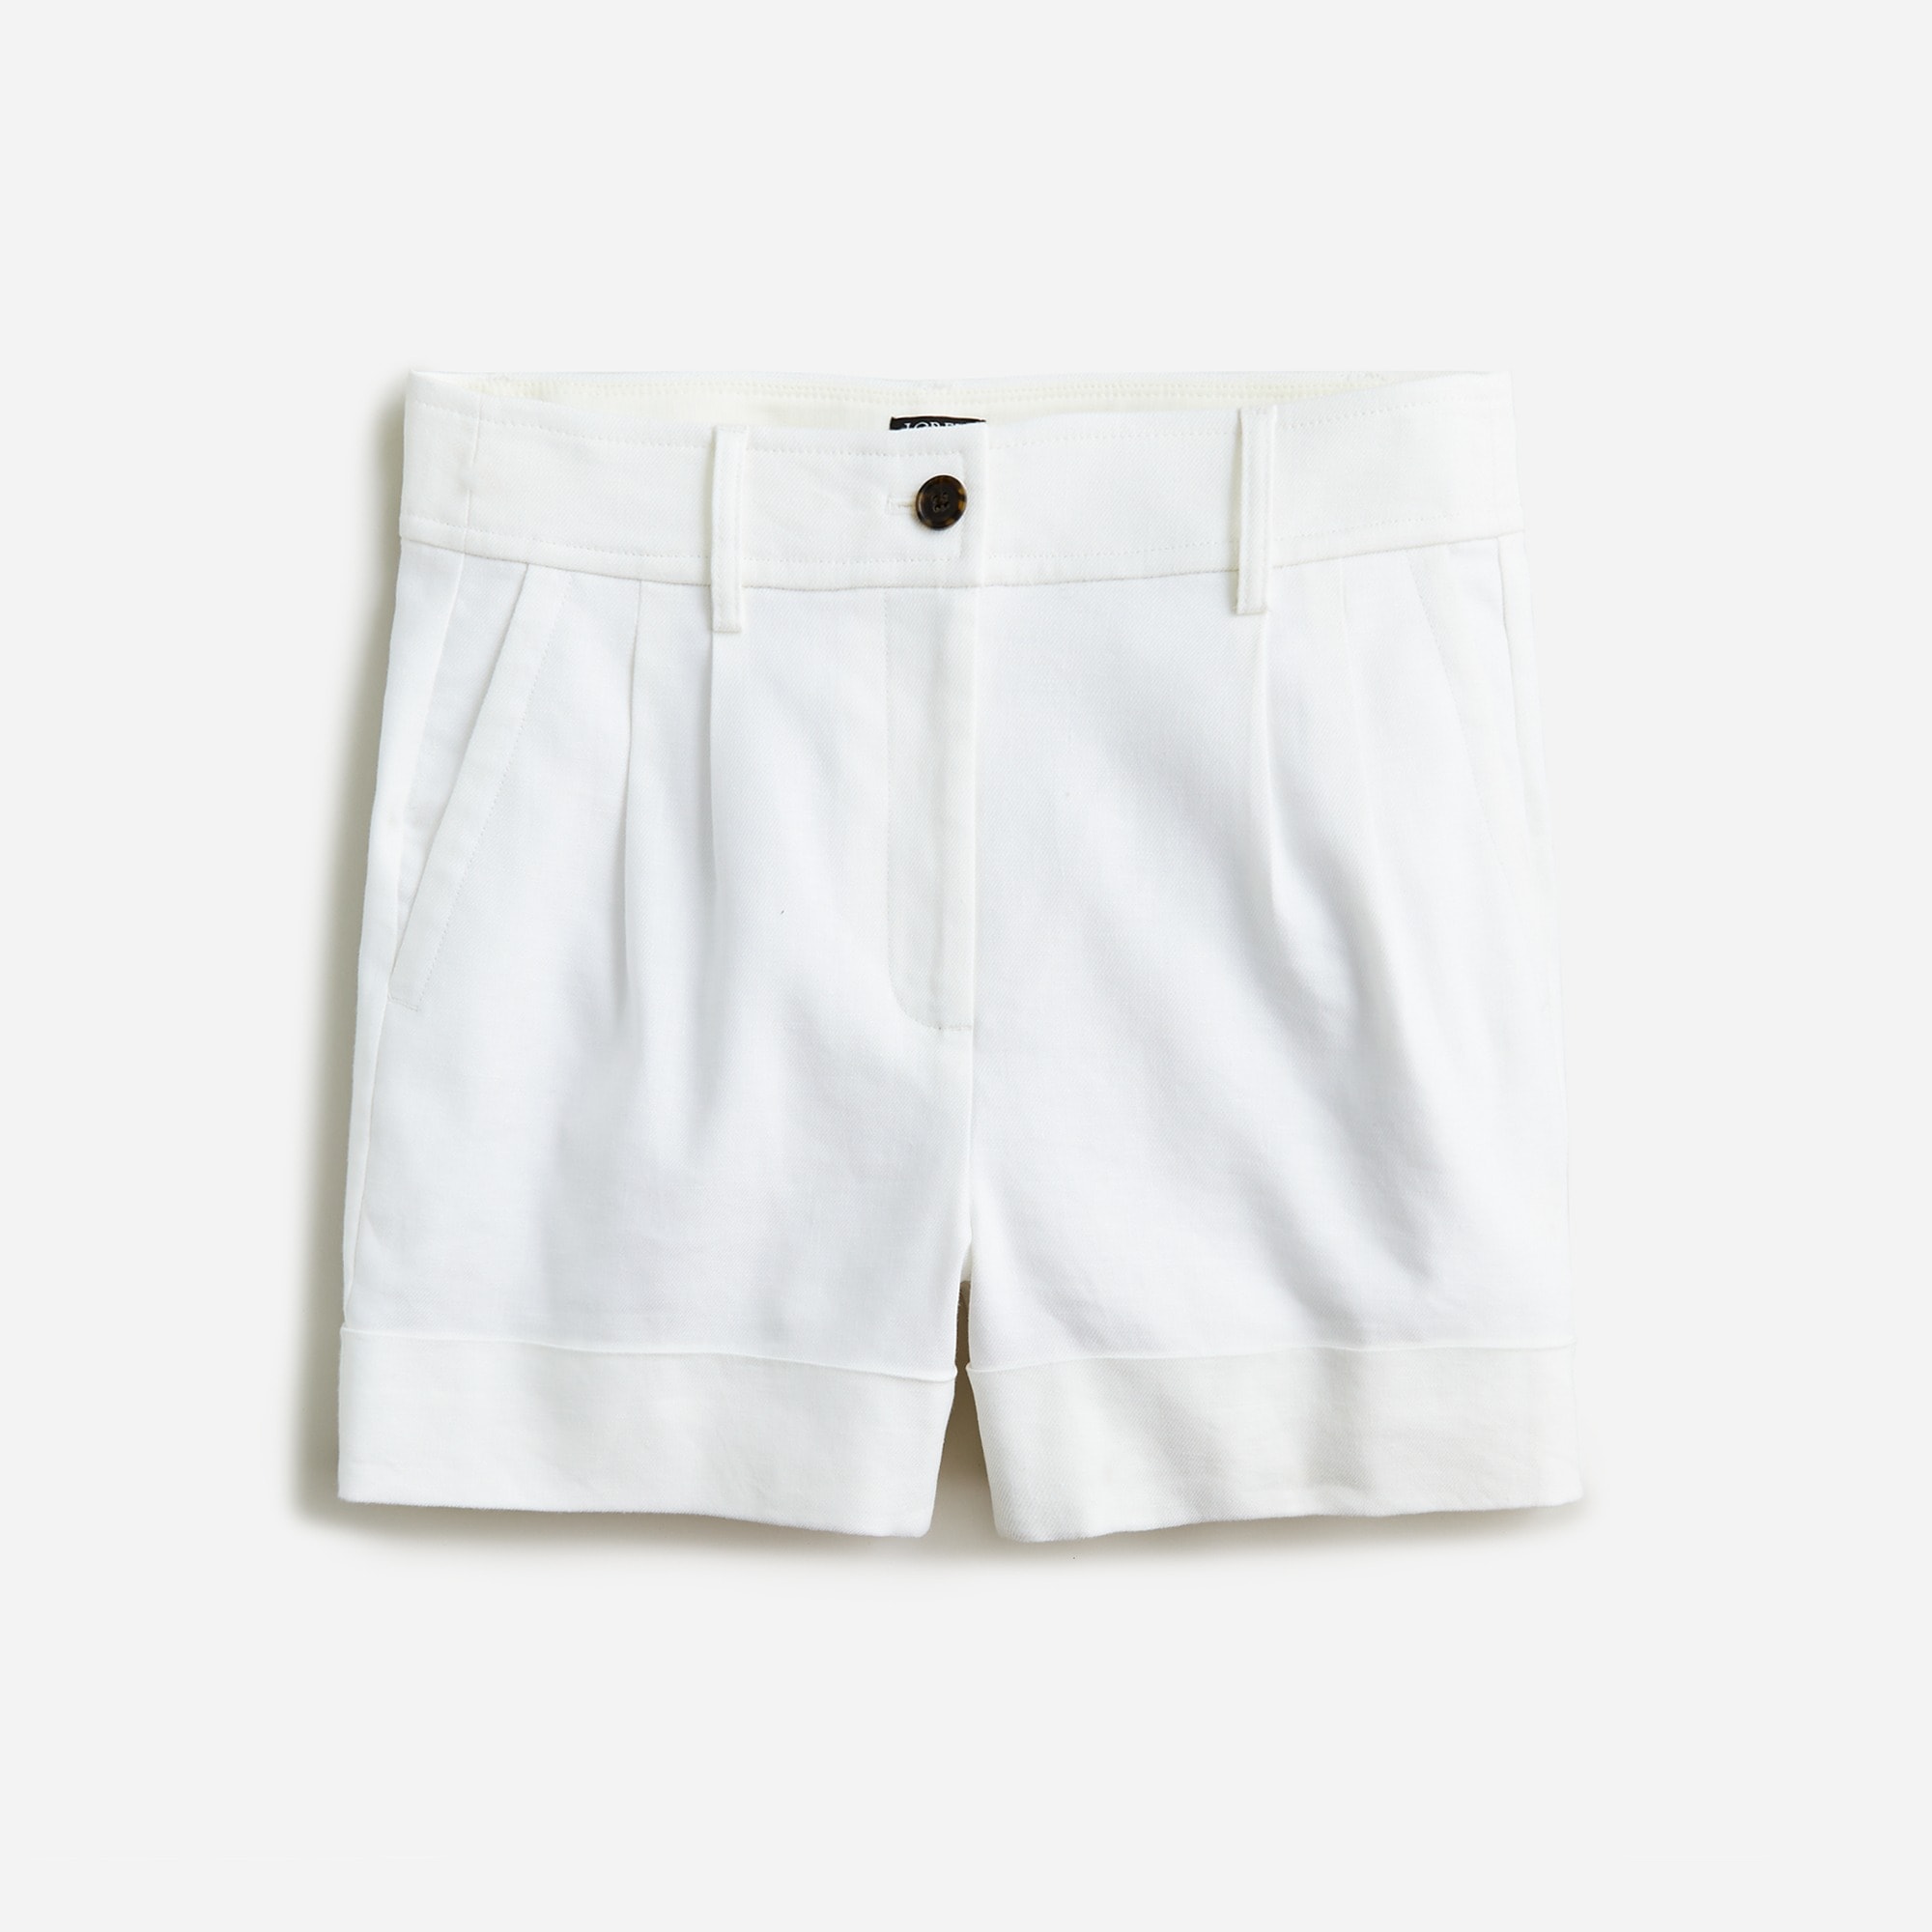 J.Crew: Cuffed High-rise Suit Short In Stretch Linen Blend For Women